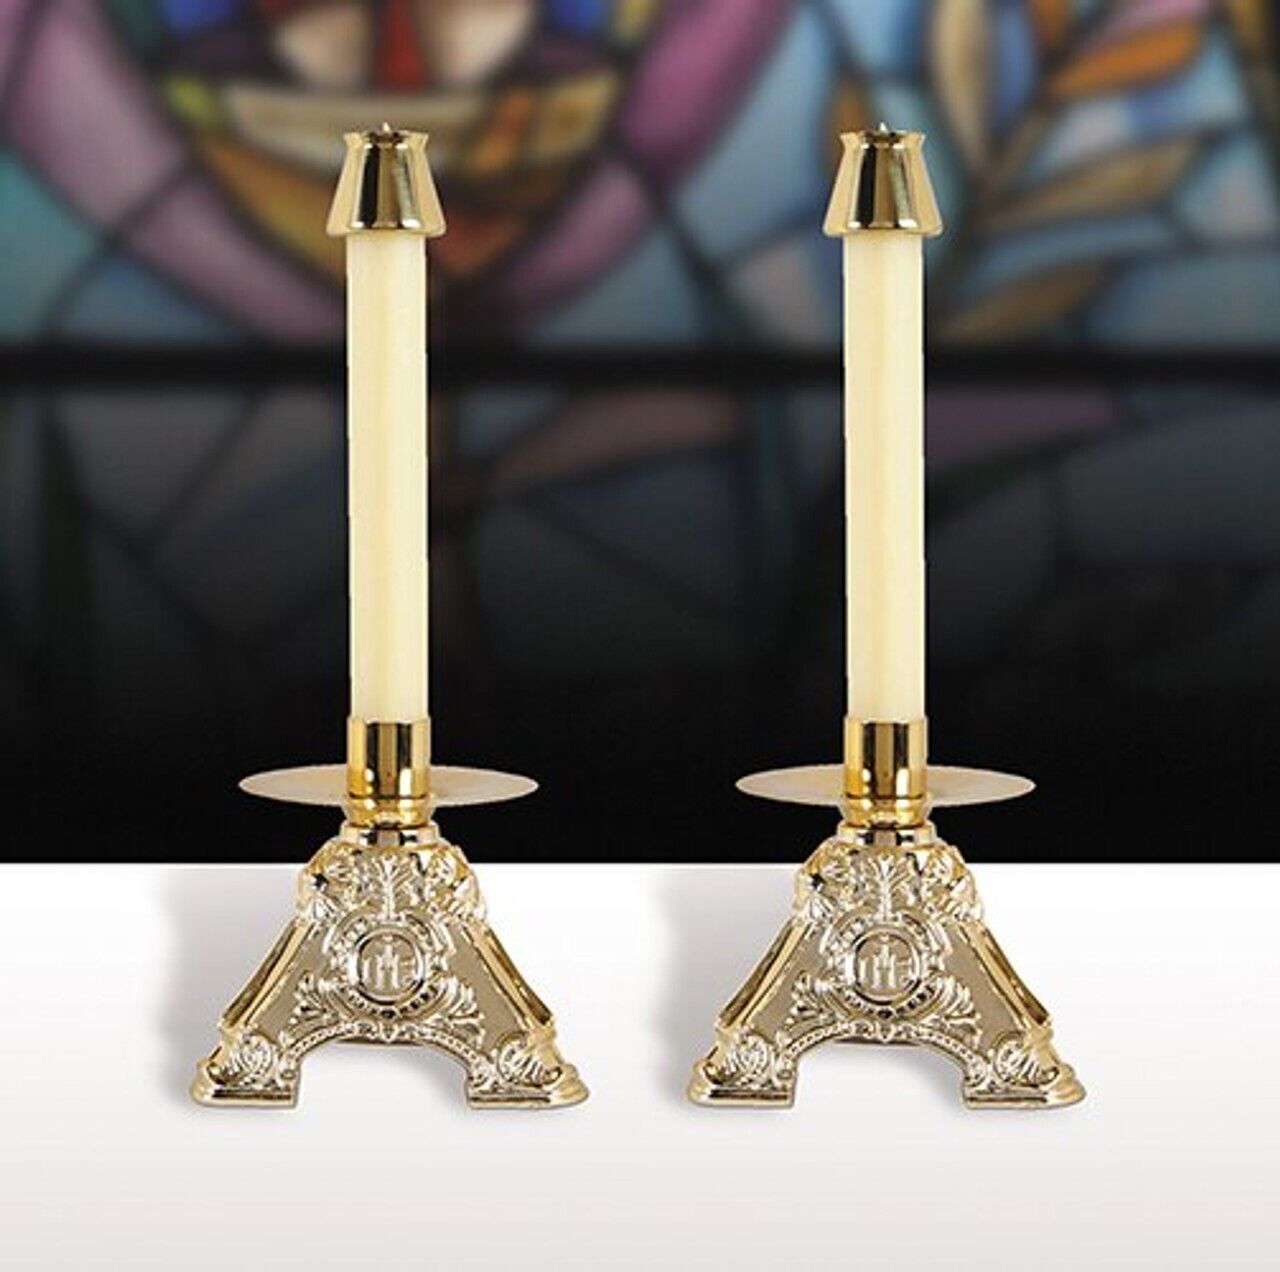 Embossed IHS Resin Set of 2 Candleholders For Church or Sanctuary 6 1/2 In